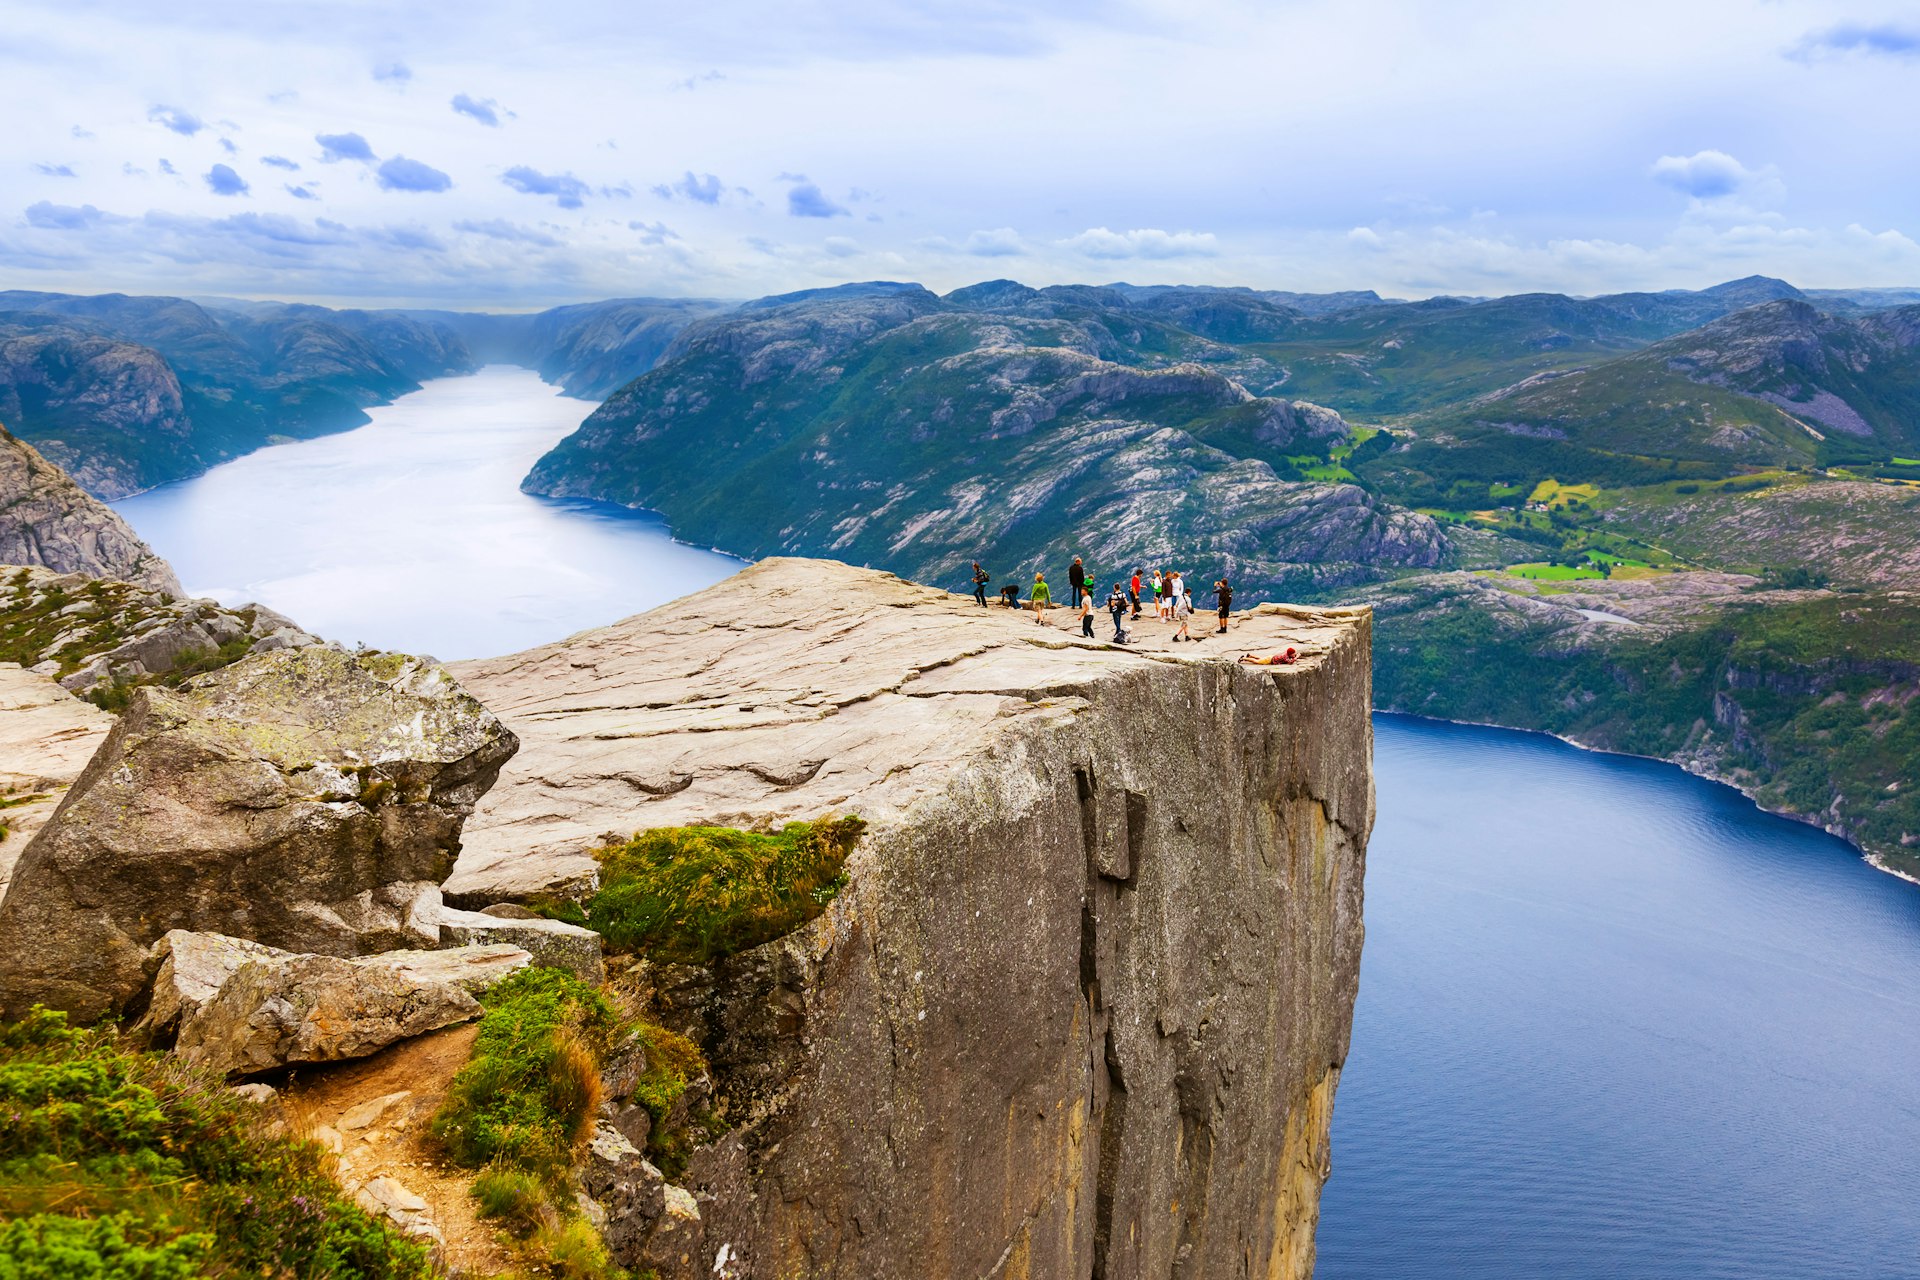 The Preikestolen in fjord Lysefjord: a large rocky platform sticking out from a cliff face in Norway. People stand on the cliff to observe the view of the large lake below.